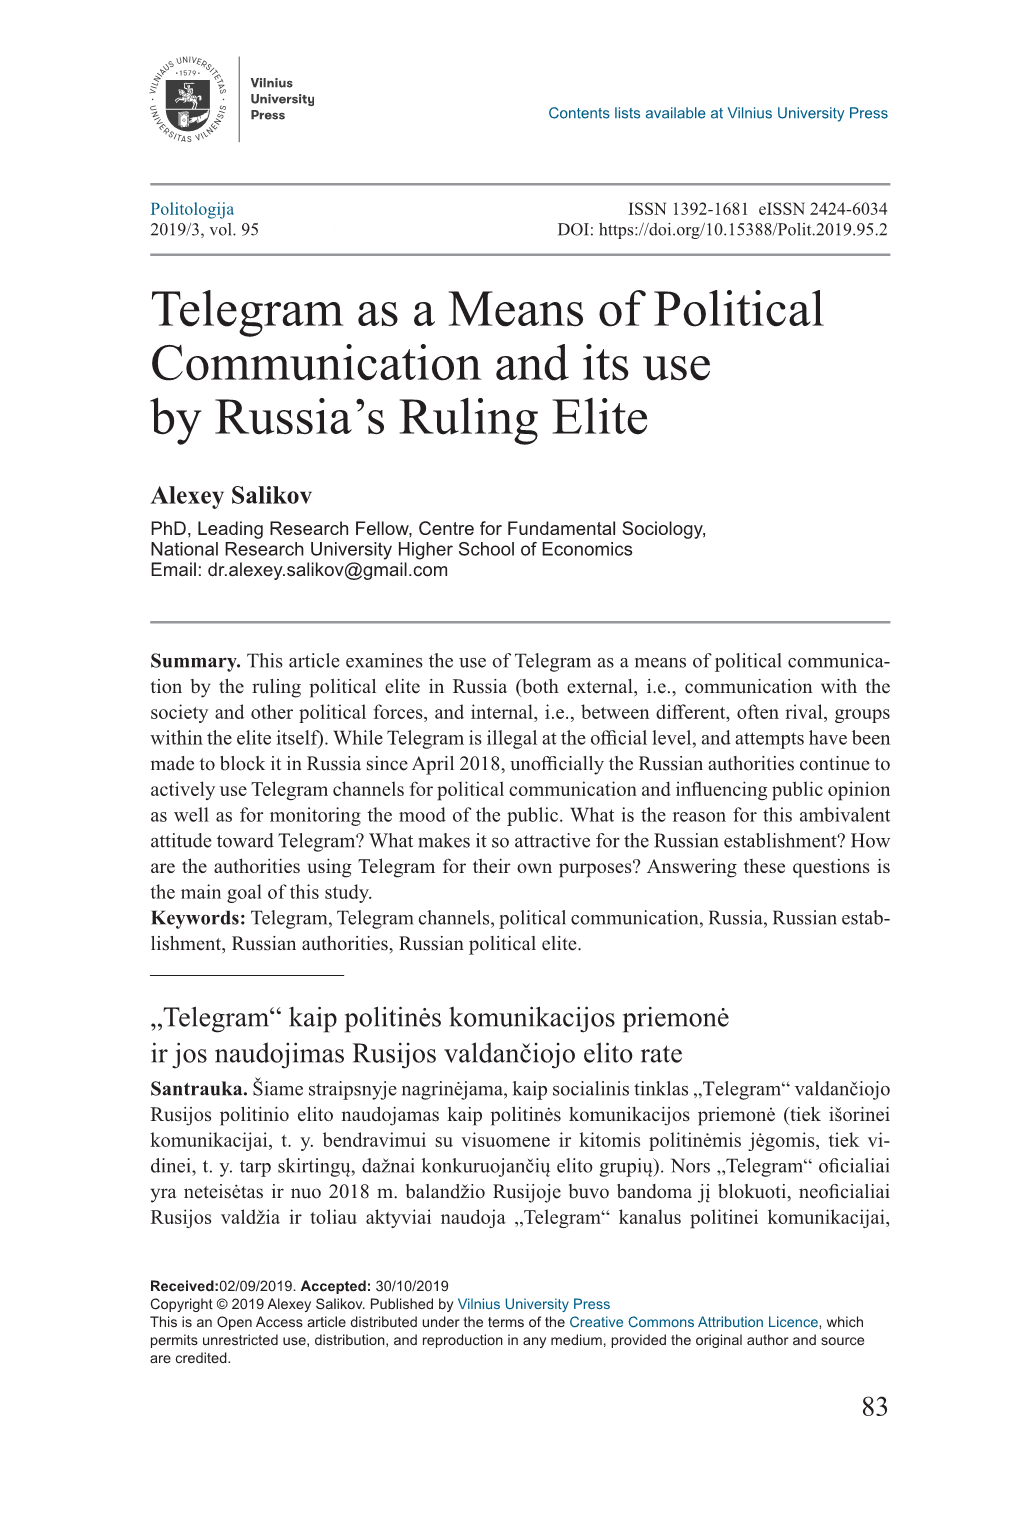 Telegram As a Means of Political Communication and Its Use by Russia’S Ruling Elite